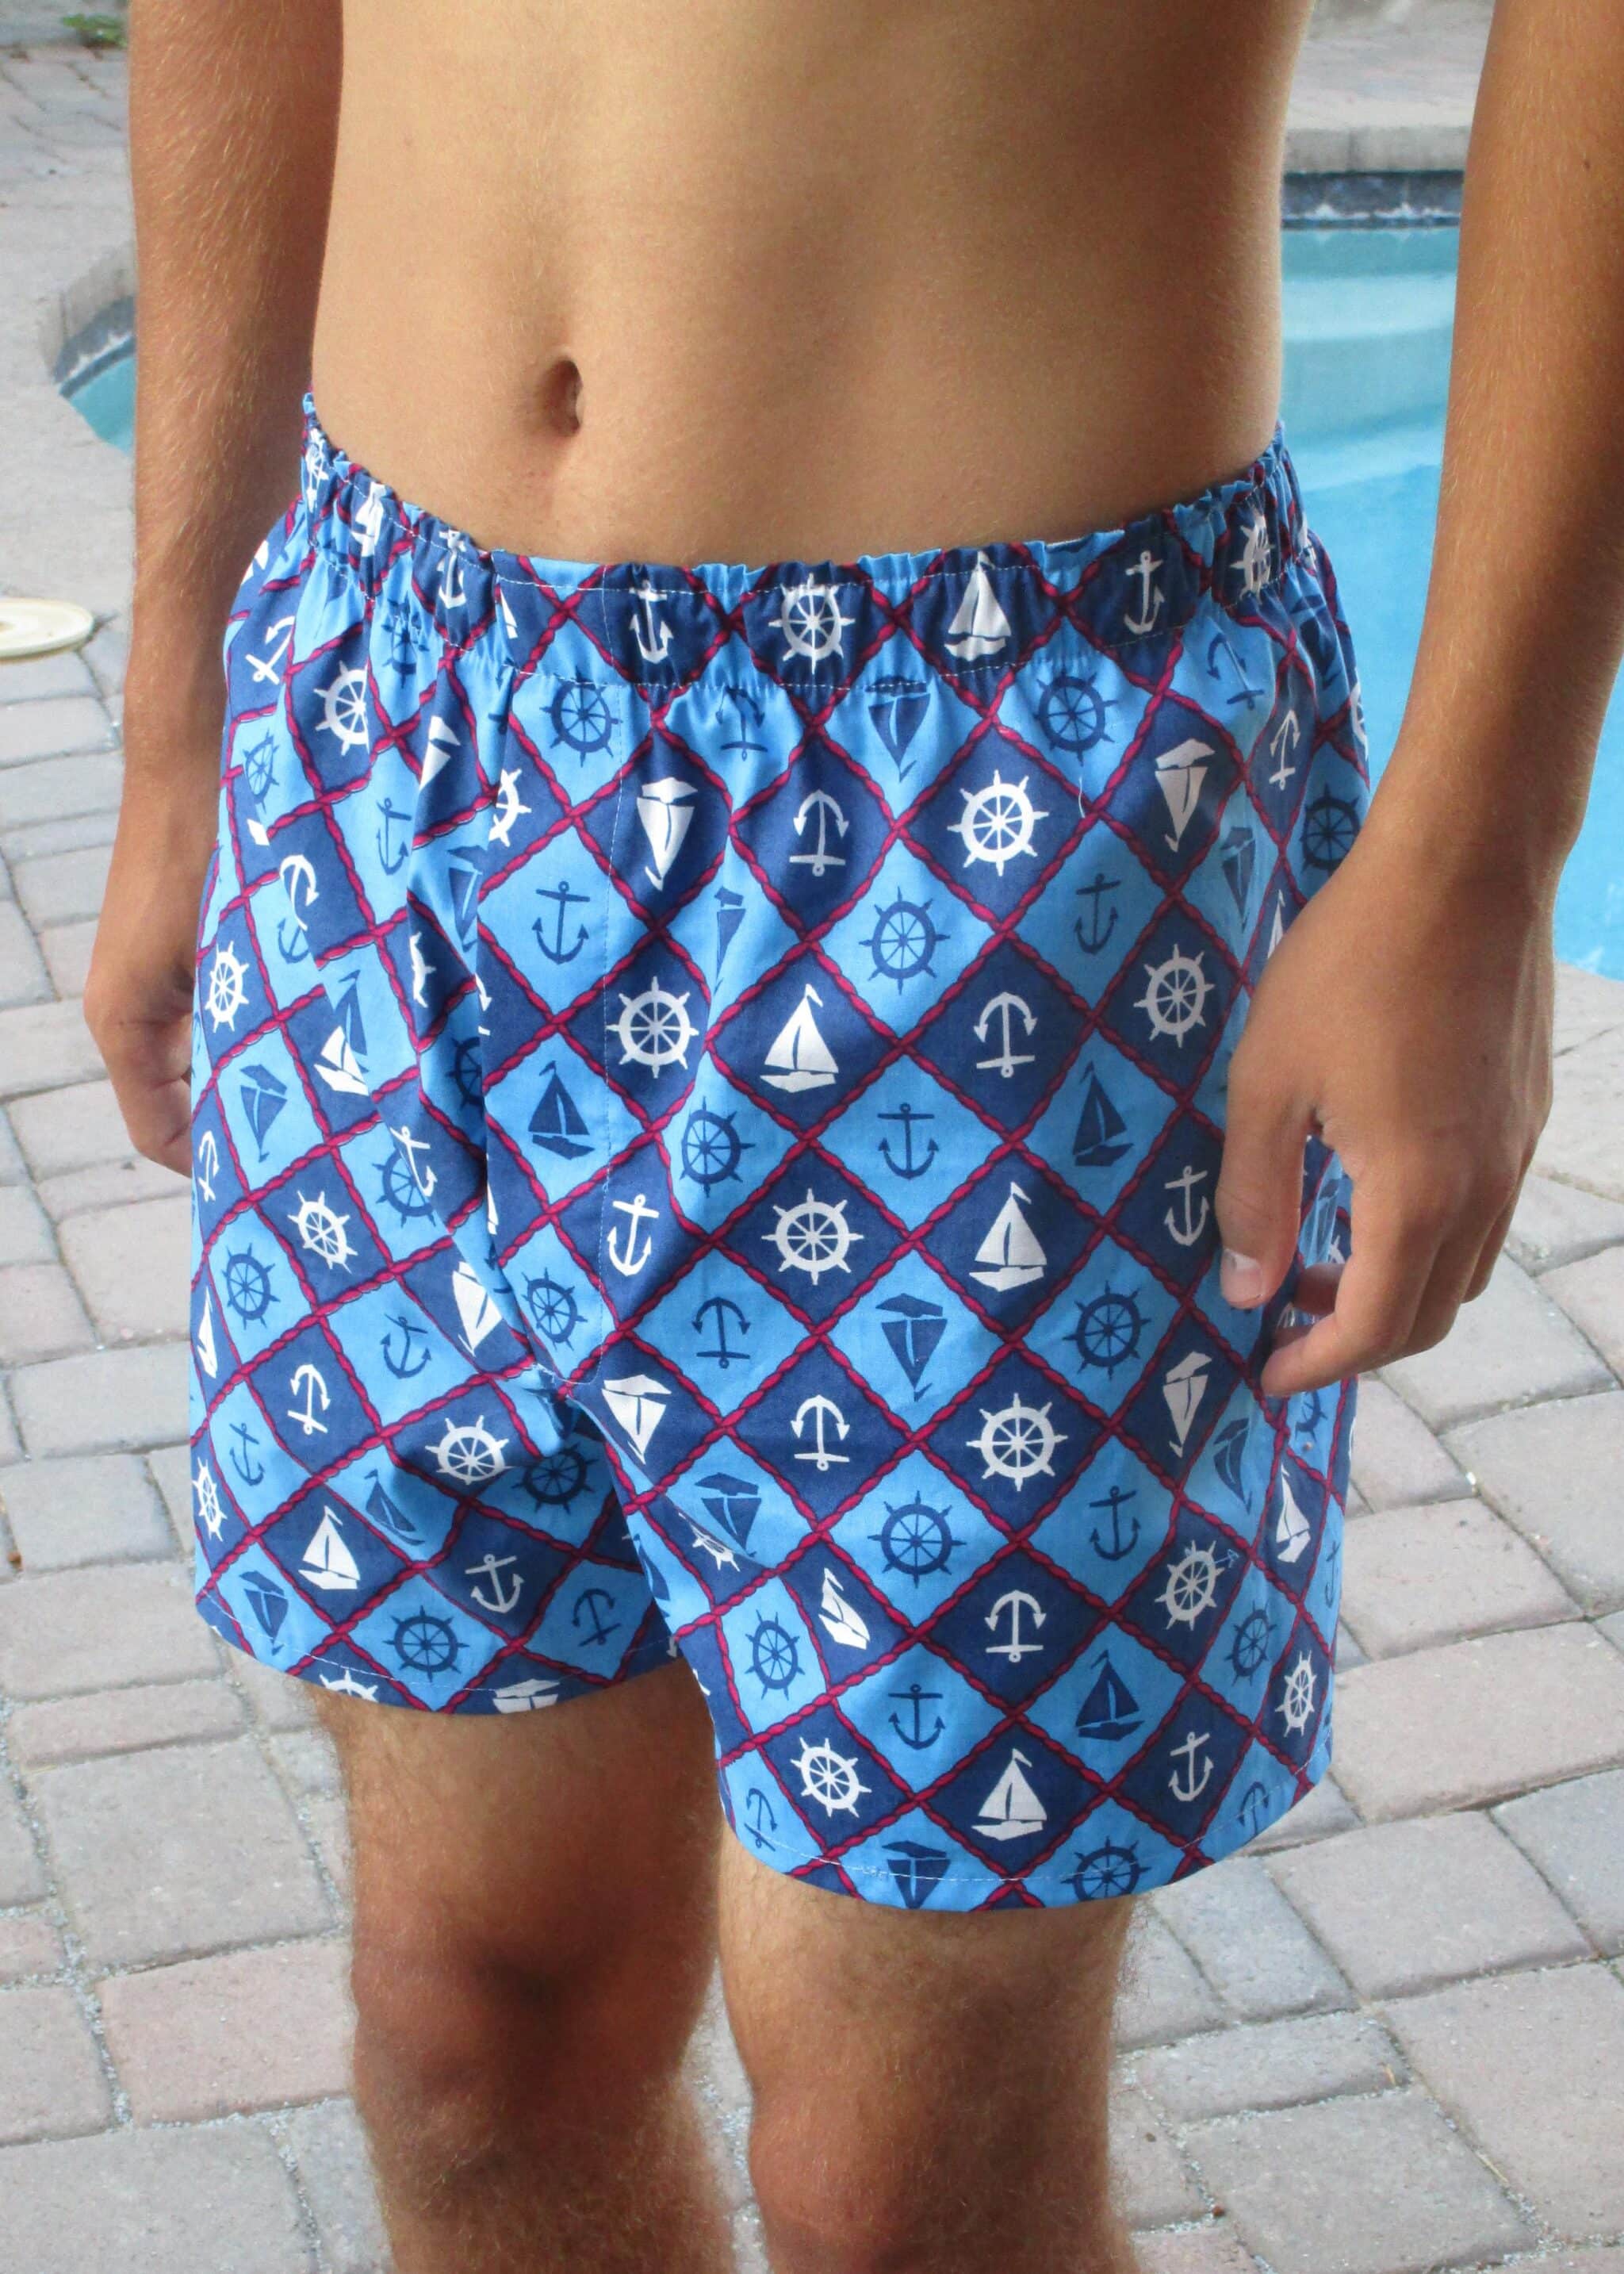 Men's Woven Boxer Shorts - 5 out of 4 Patterns